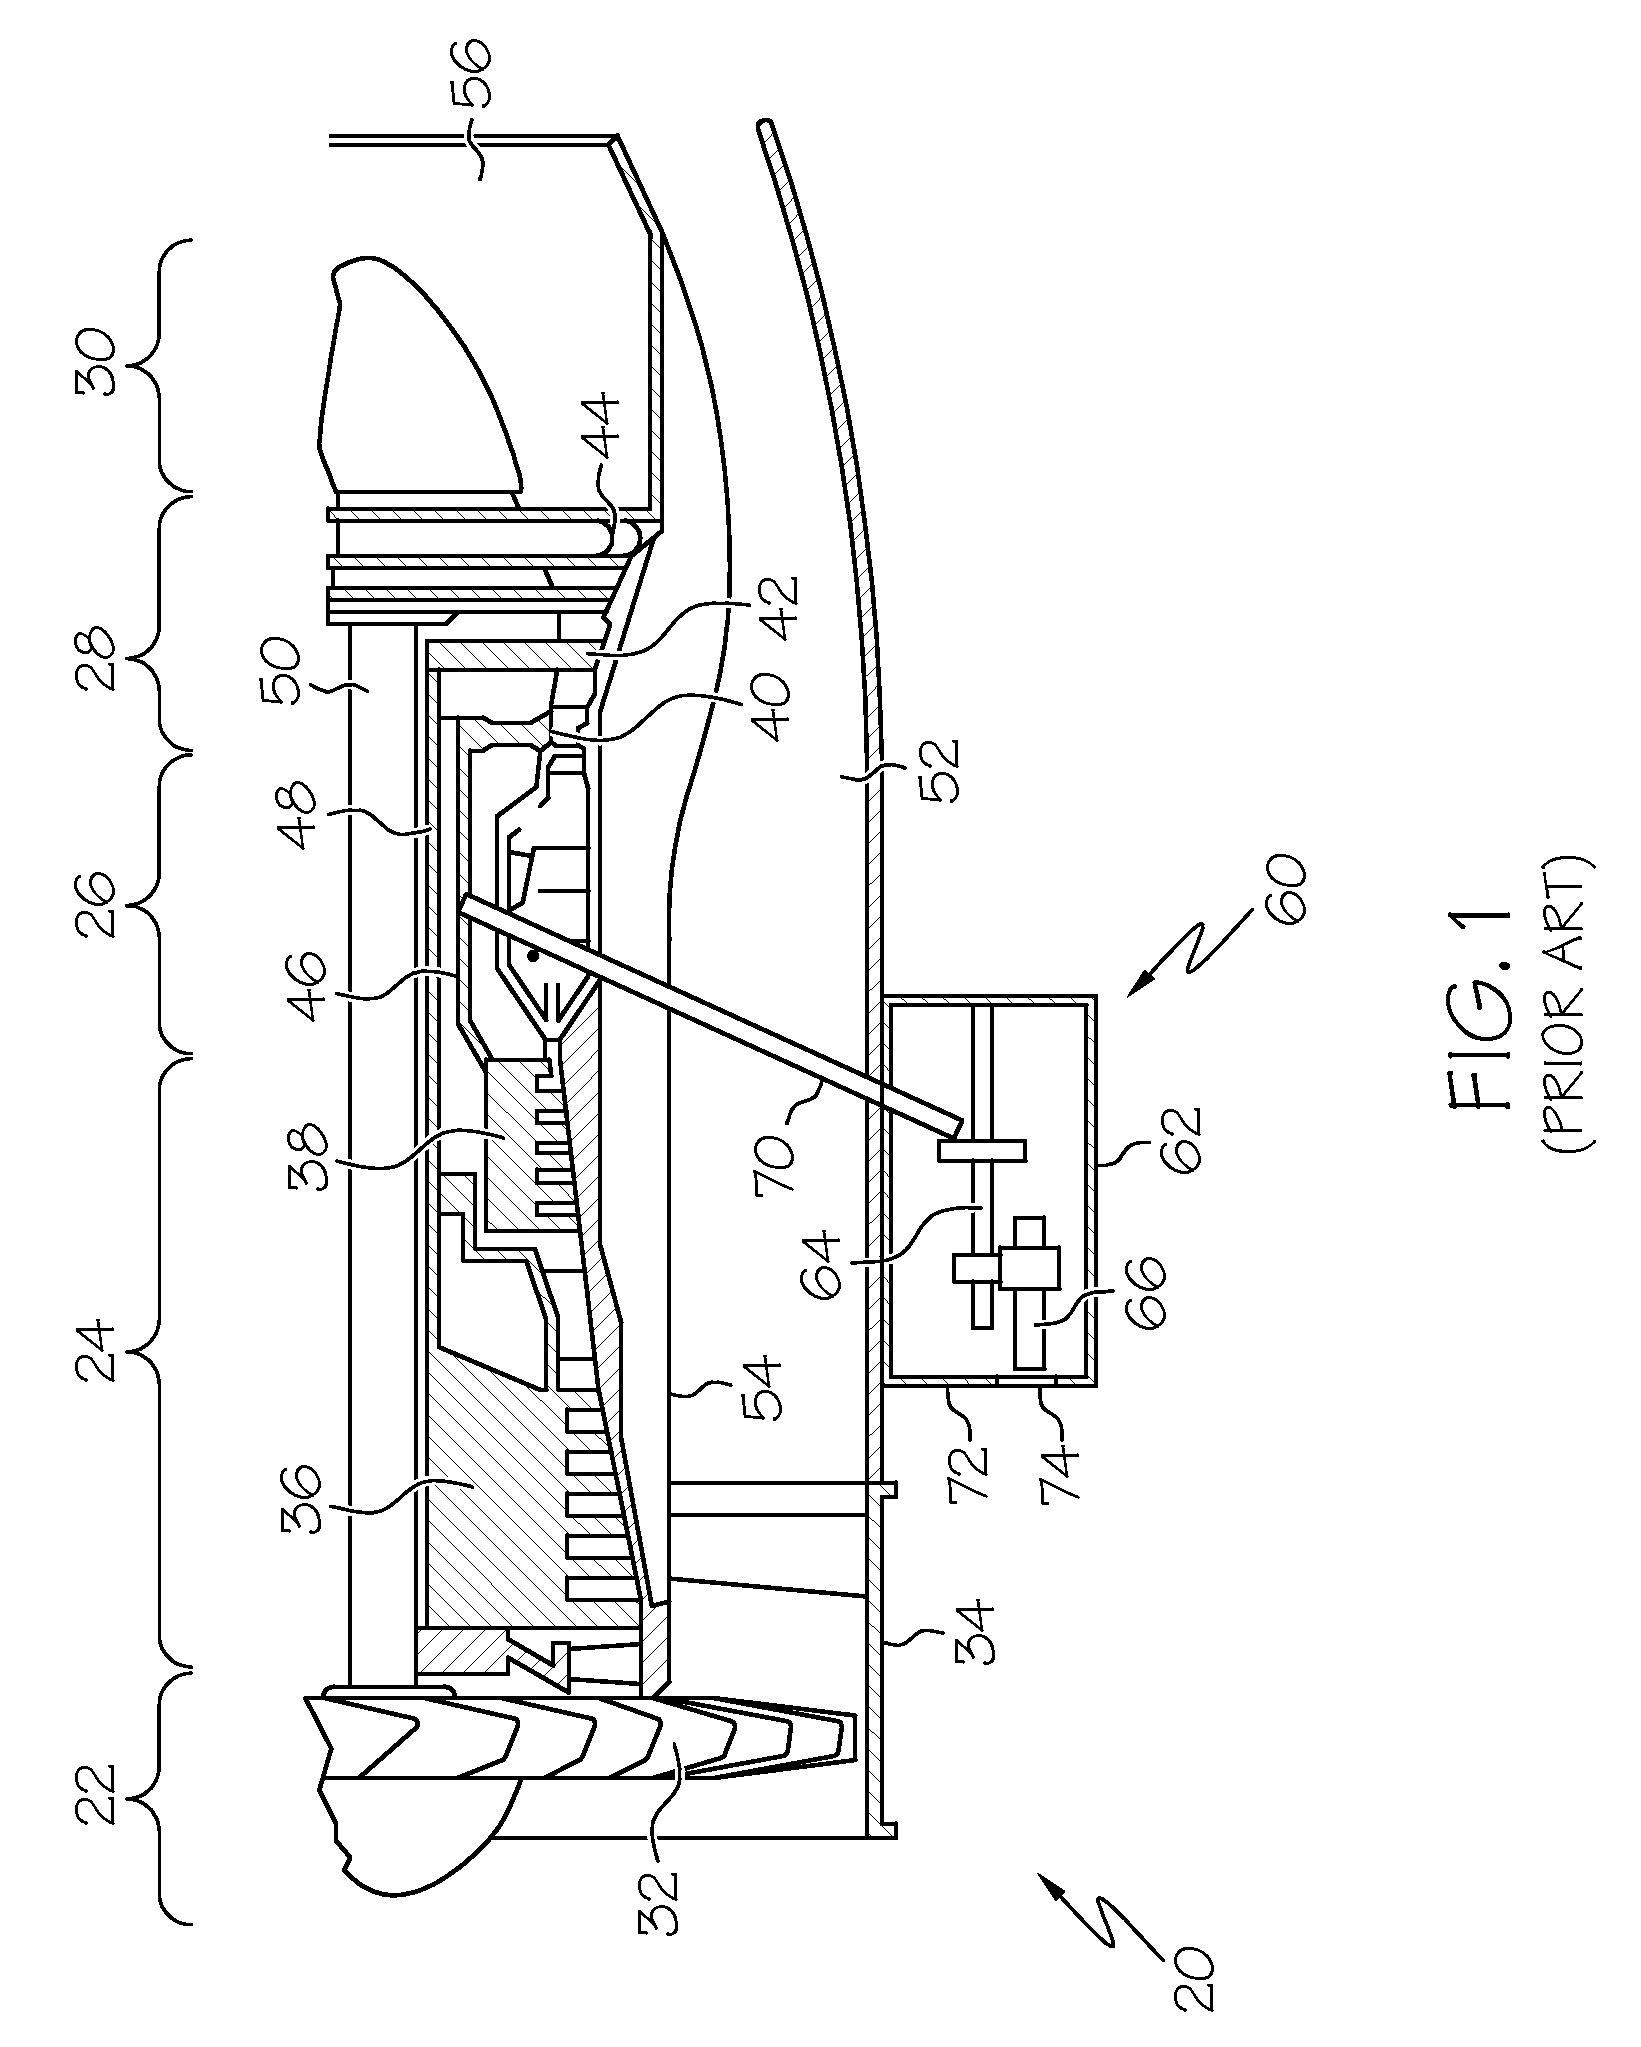 Synchronous signal generator for trim balancing of jet engine